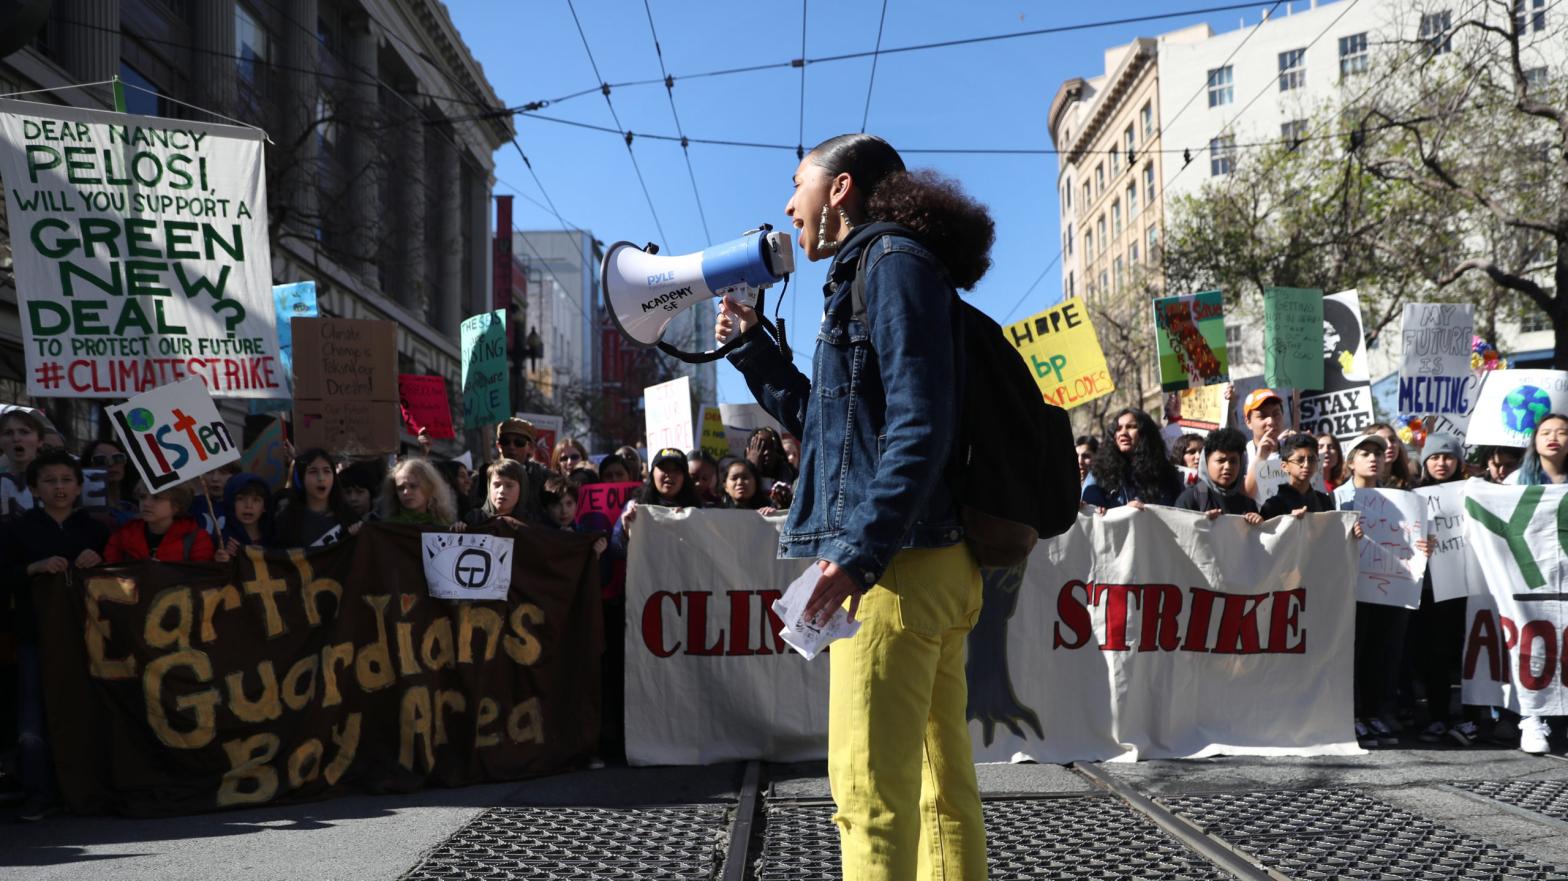 A climate striker leads a march in San Francisco in March 2019. (Photo: Justin Sullivan, Getty Images)